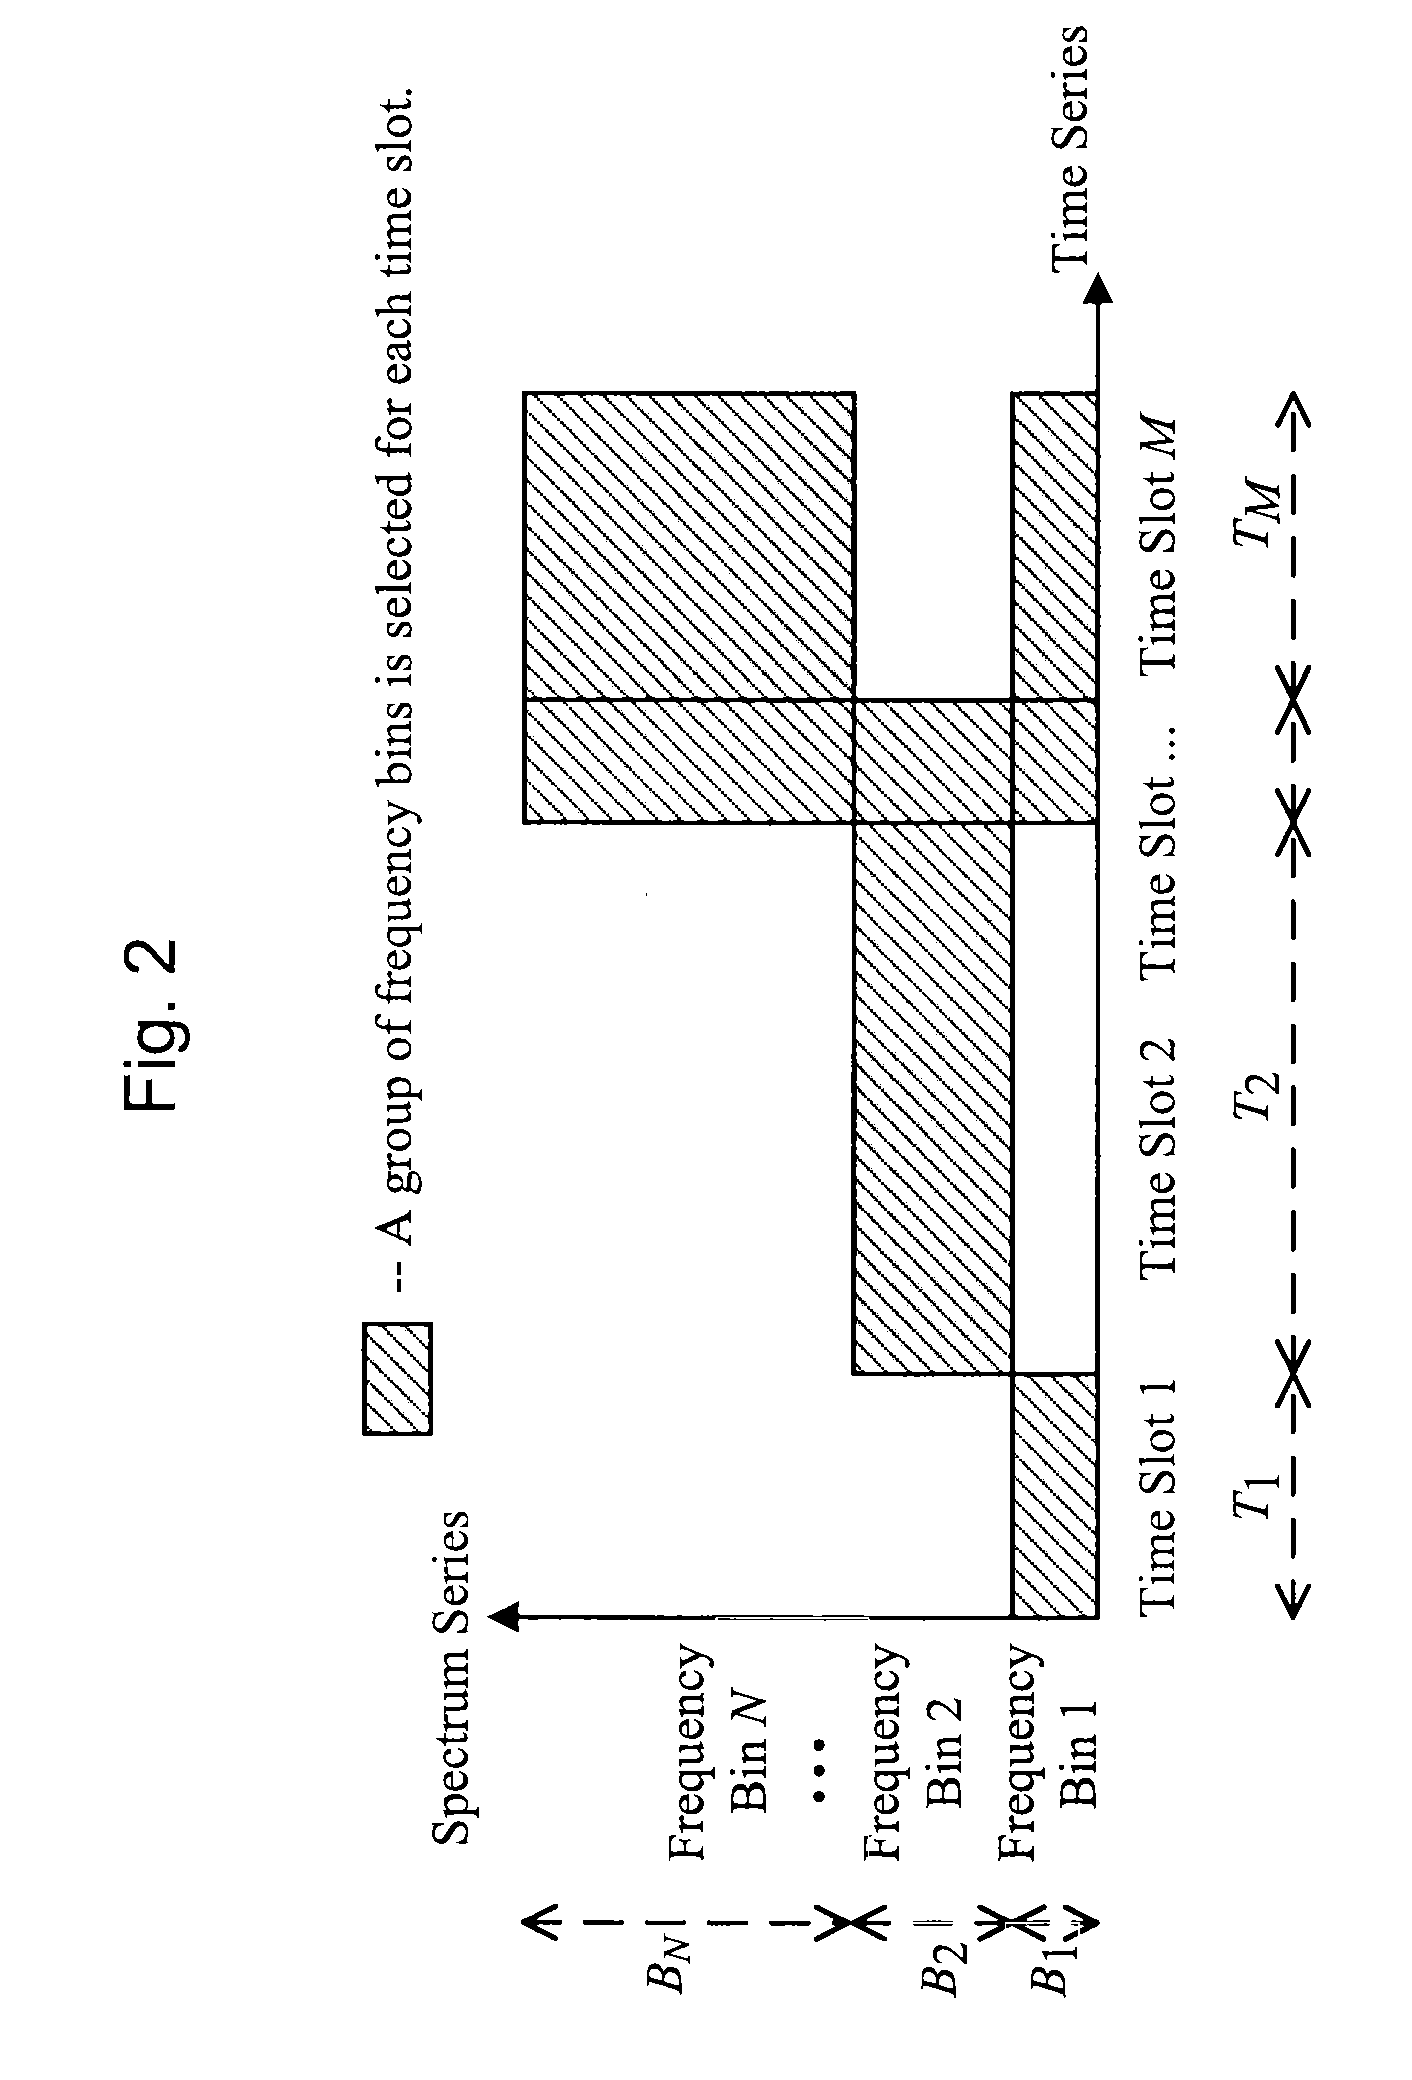 Inaudible methods, apparatus and systems for jointly transmitting and processing, analog-digital information